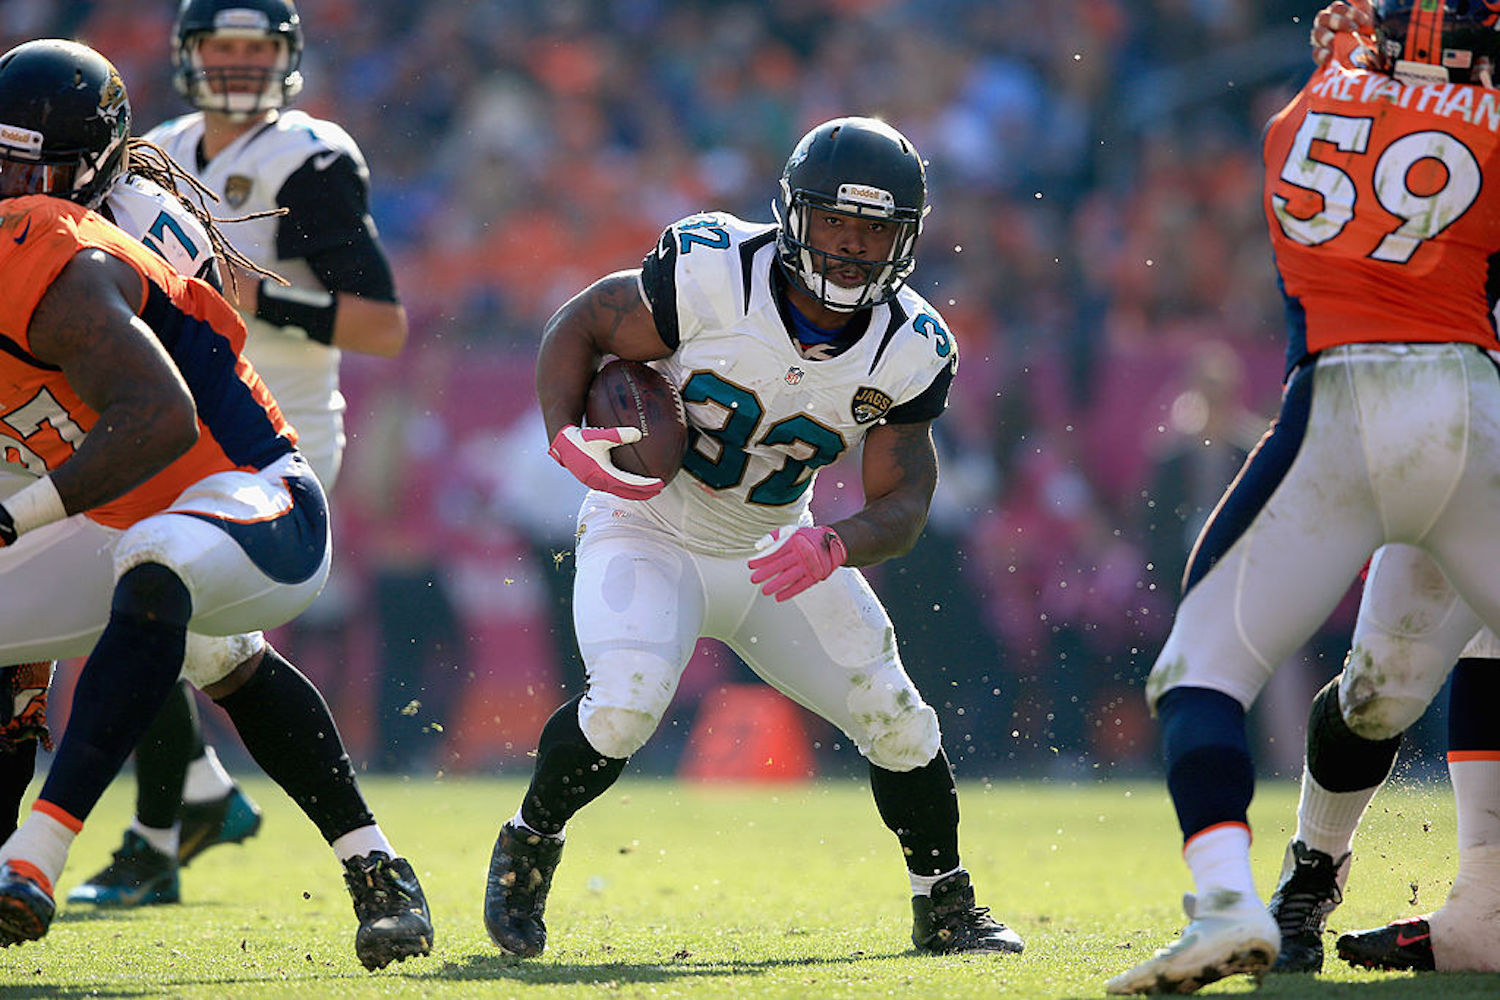 Leonard Fournette was unexpectedly cut by the Jaguars Monday, and Maurice Jones-Drew didn't hold back when asked what he thought of the move.